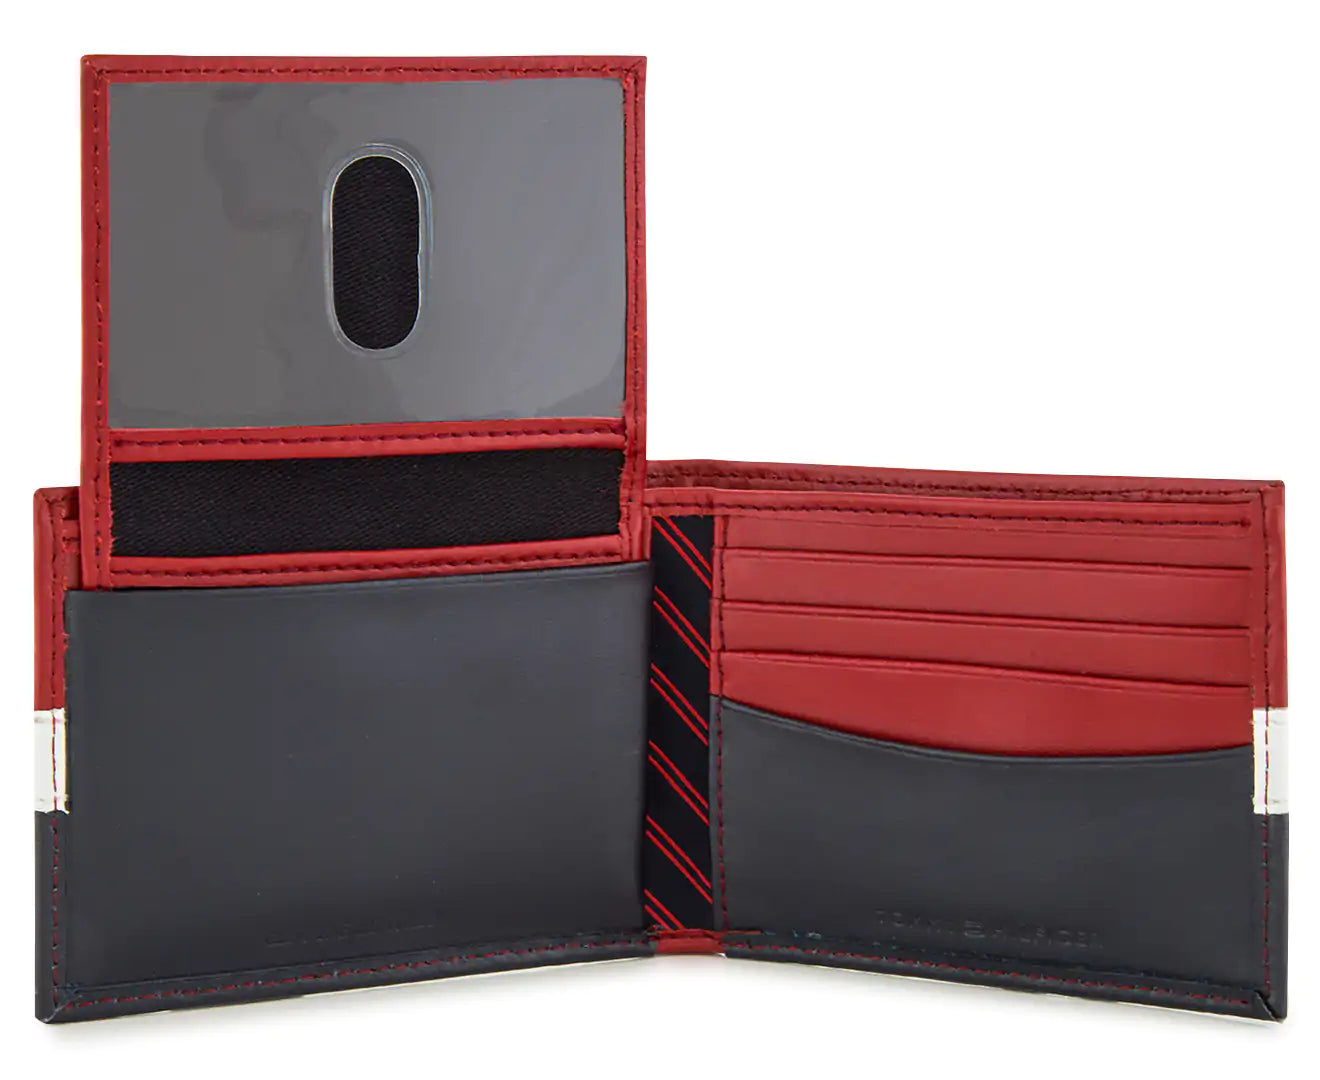 Tommy Hilfiger Men's Wallet Genuine Leather Passcase with Multiple Card Slots - Red/Navy/White